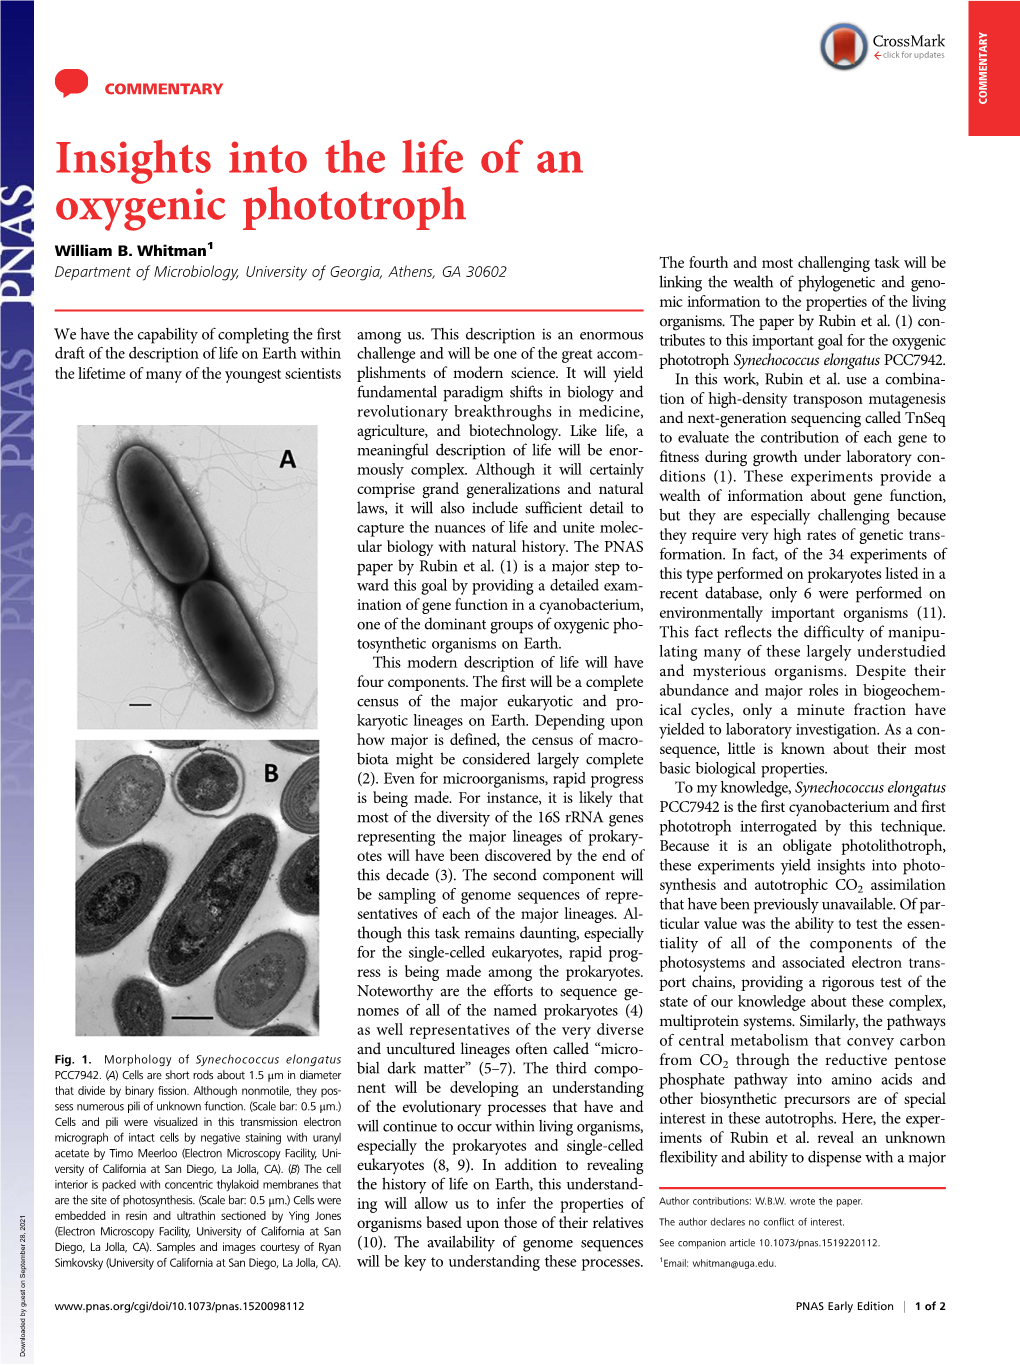 Insights Into the Life of an Oxygenic Phototroph William B